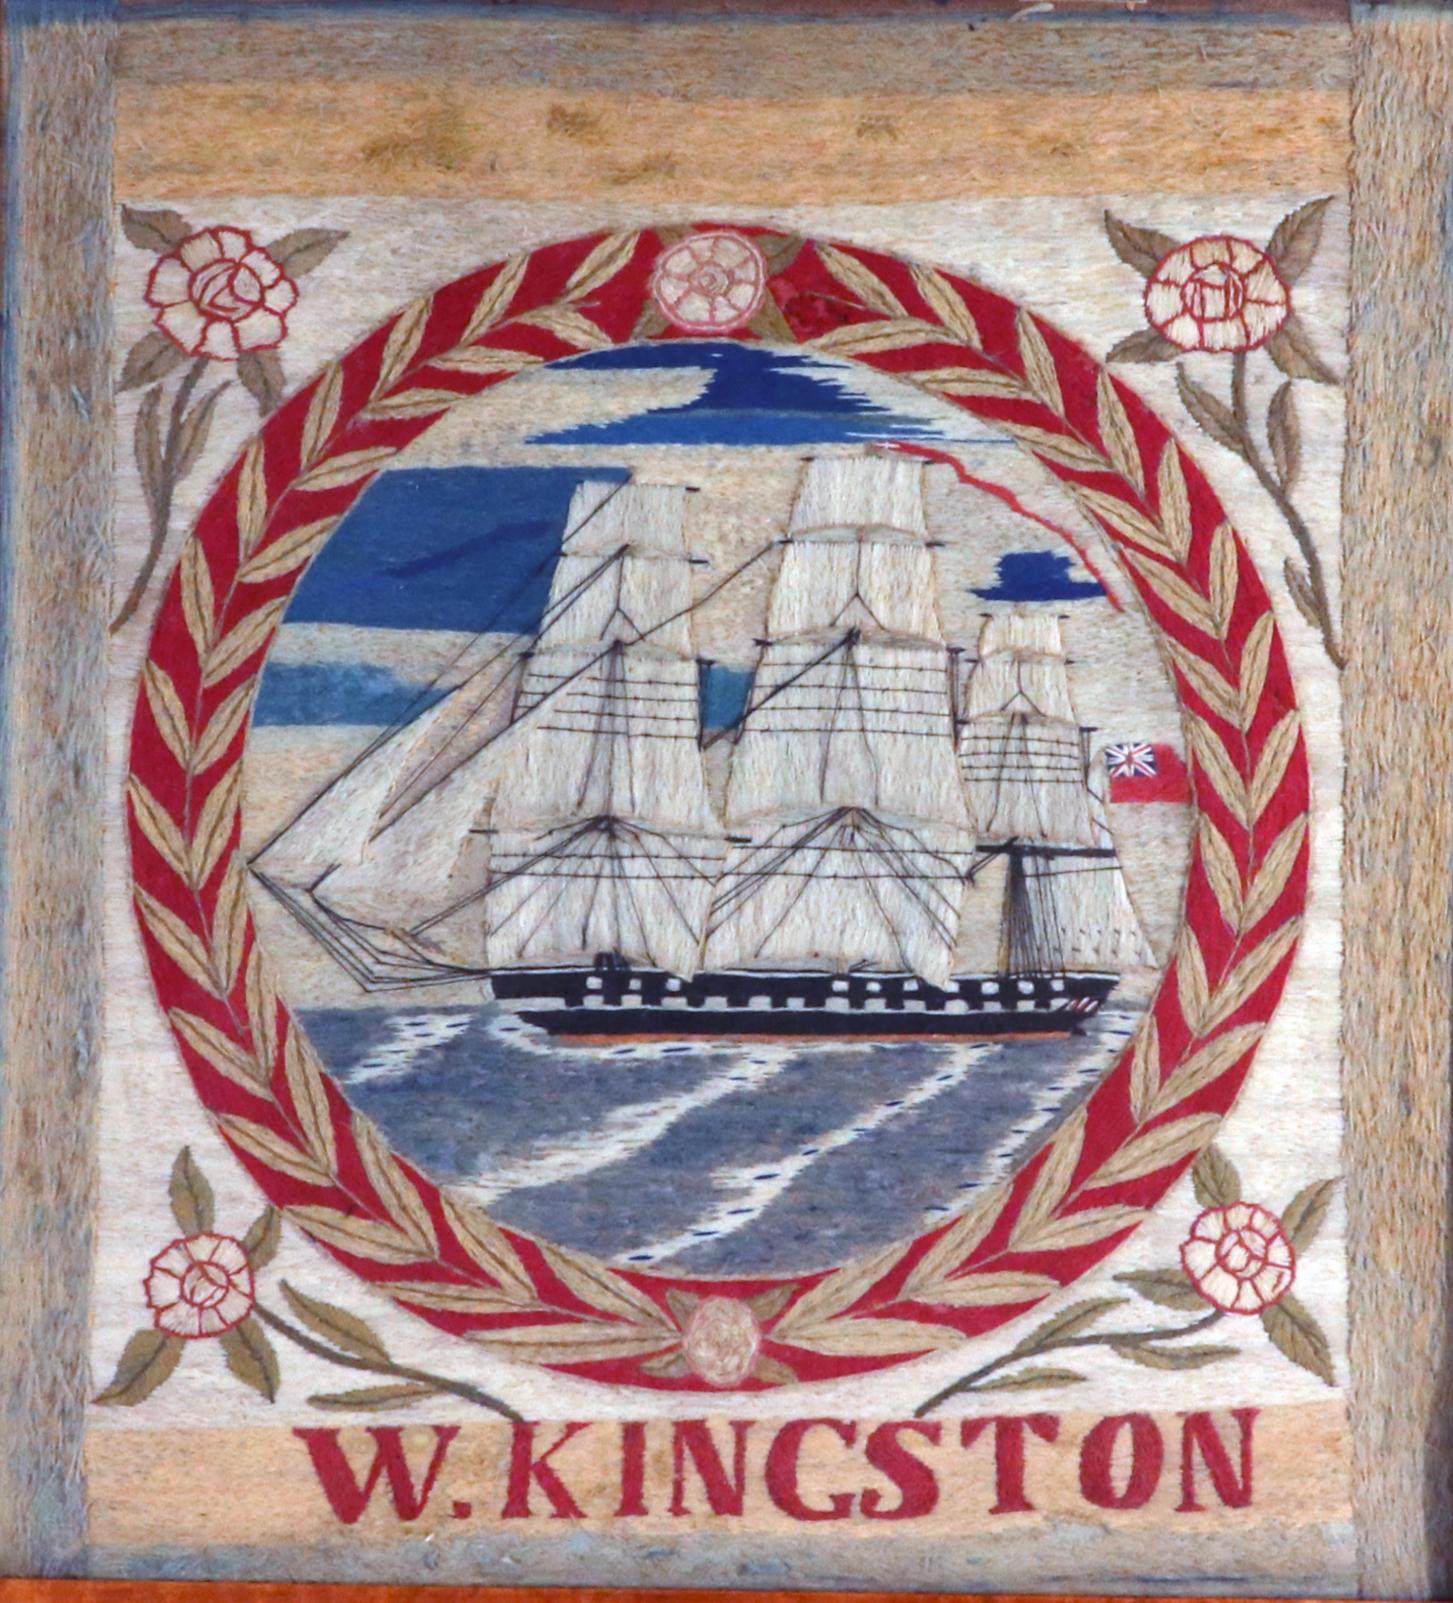 British Sailor's Woolwork,
Signed W. Kingston,
Circa 1870

The charming and unusual sailor's woolwork, known as woolies, is within a maple frame, and depicts a portside view of a three-masted English merchant ship under full sail with white top